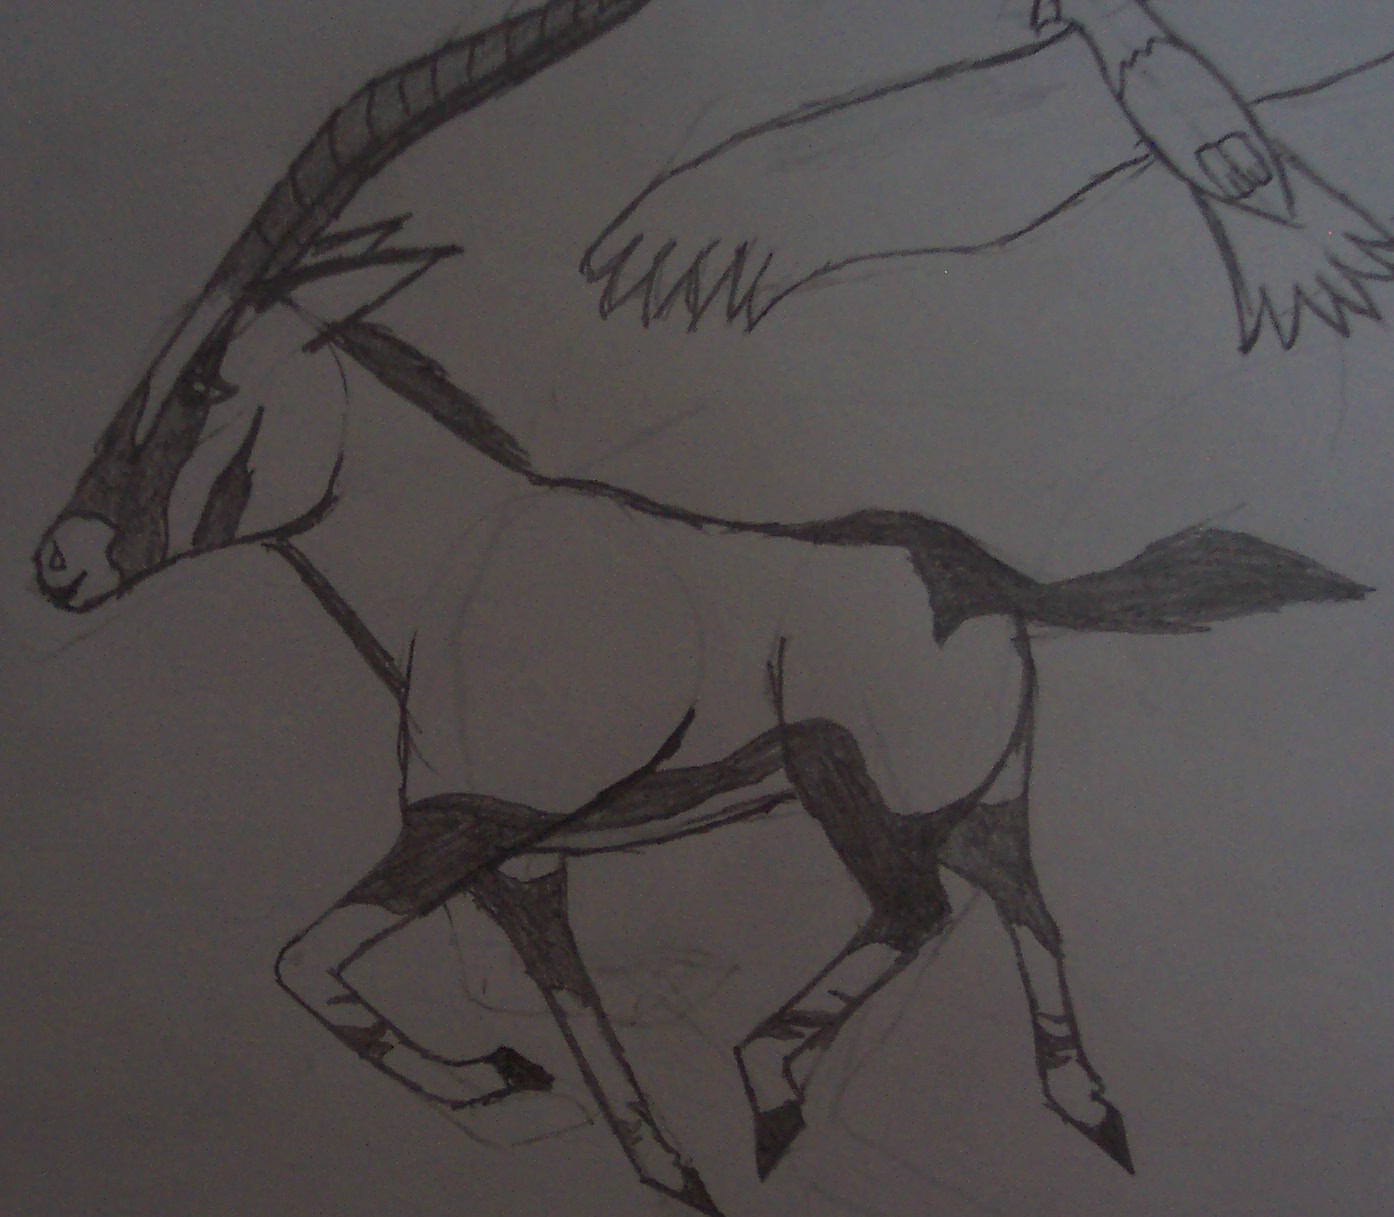 oryx by lunar_goddess_of_the_moon